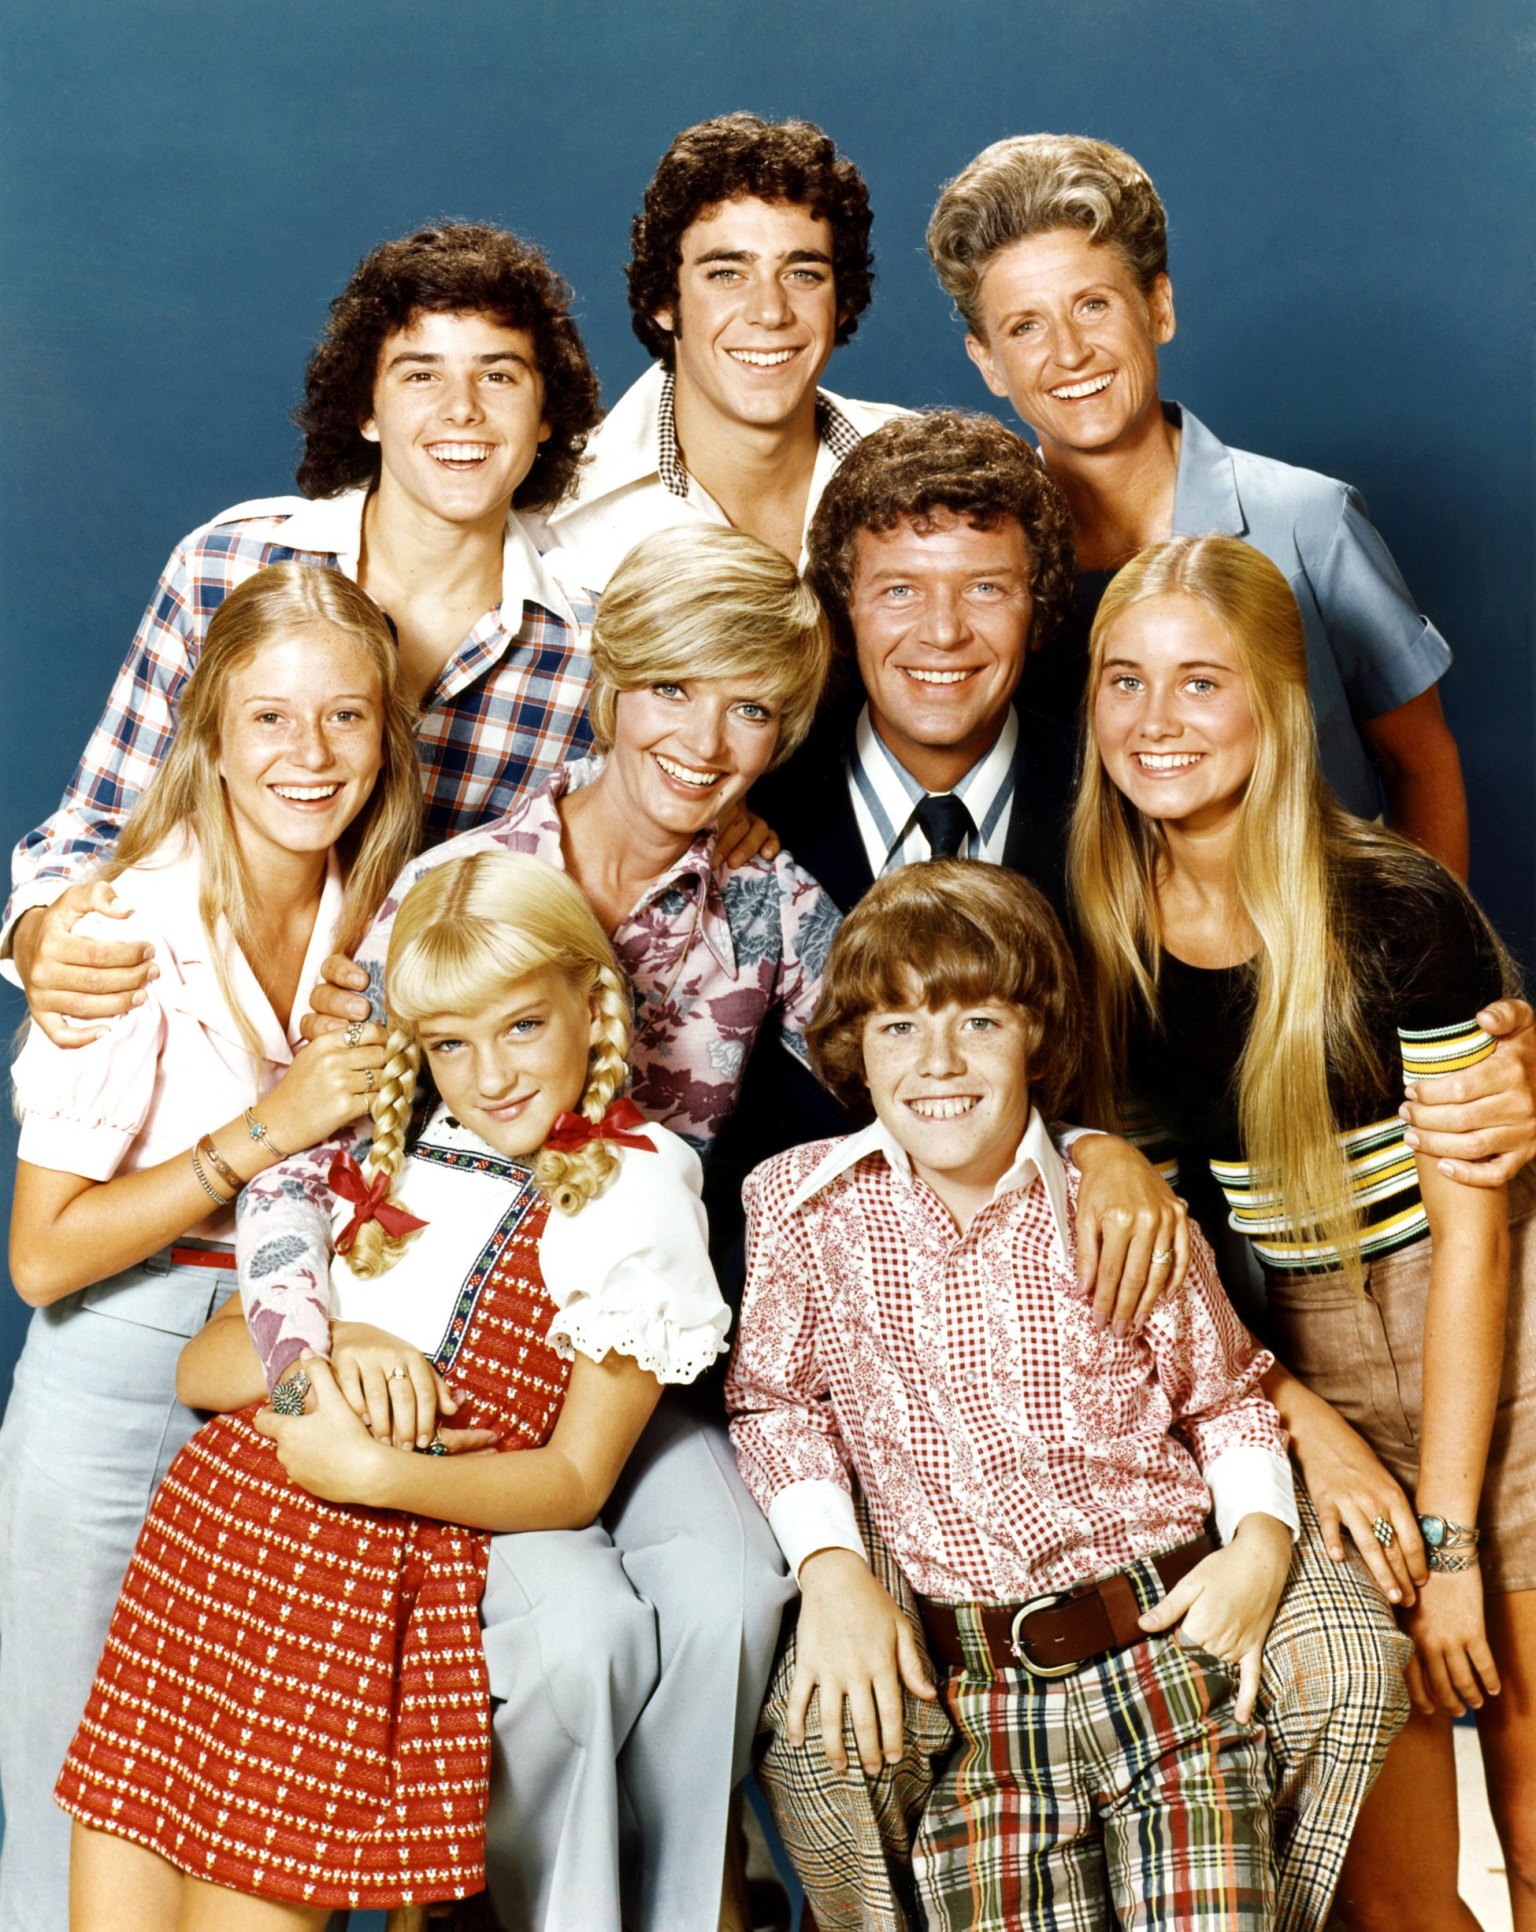 susan-olsen-on-brady-bunch-sibling-rivalry-alleged-hookups-and-more